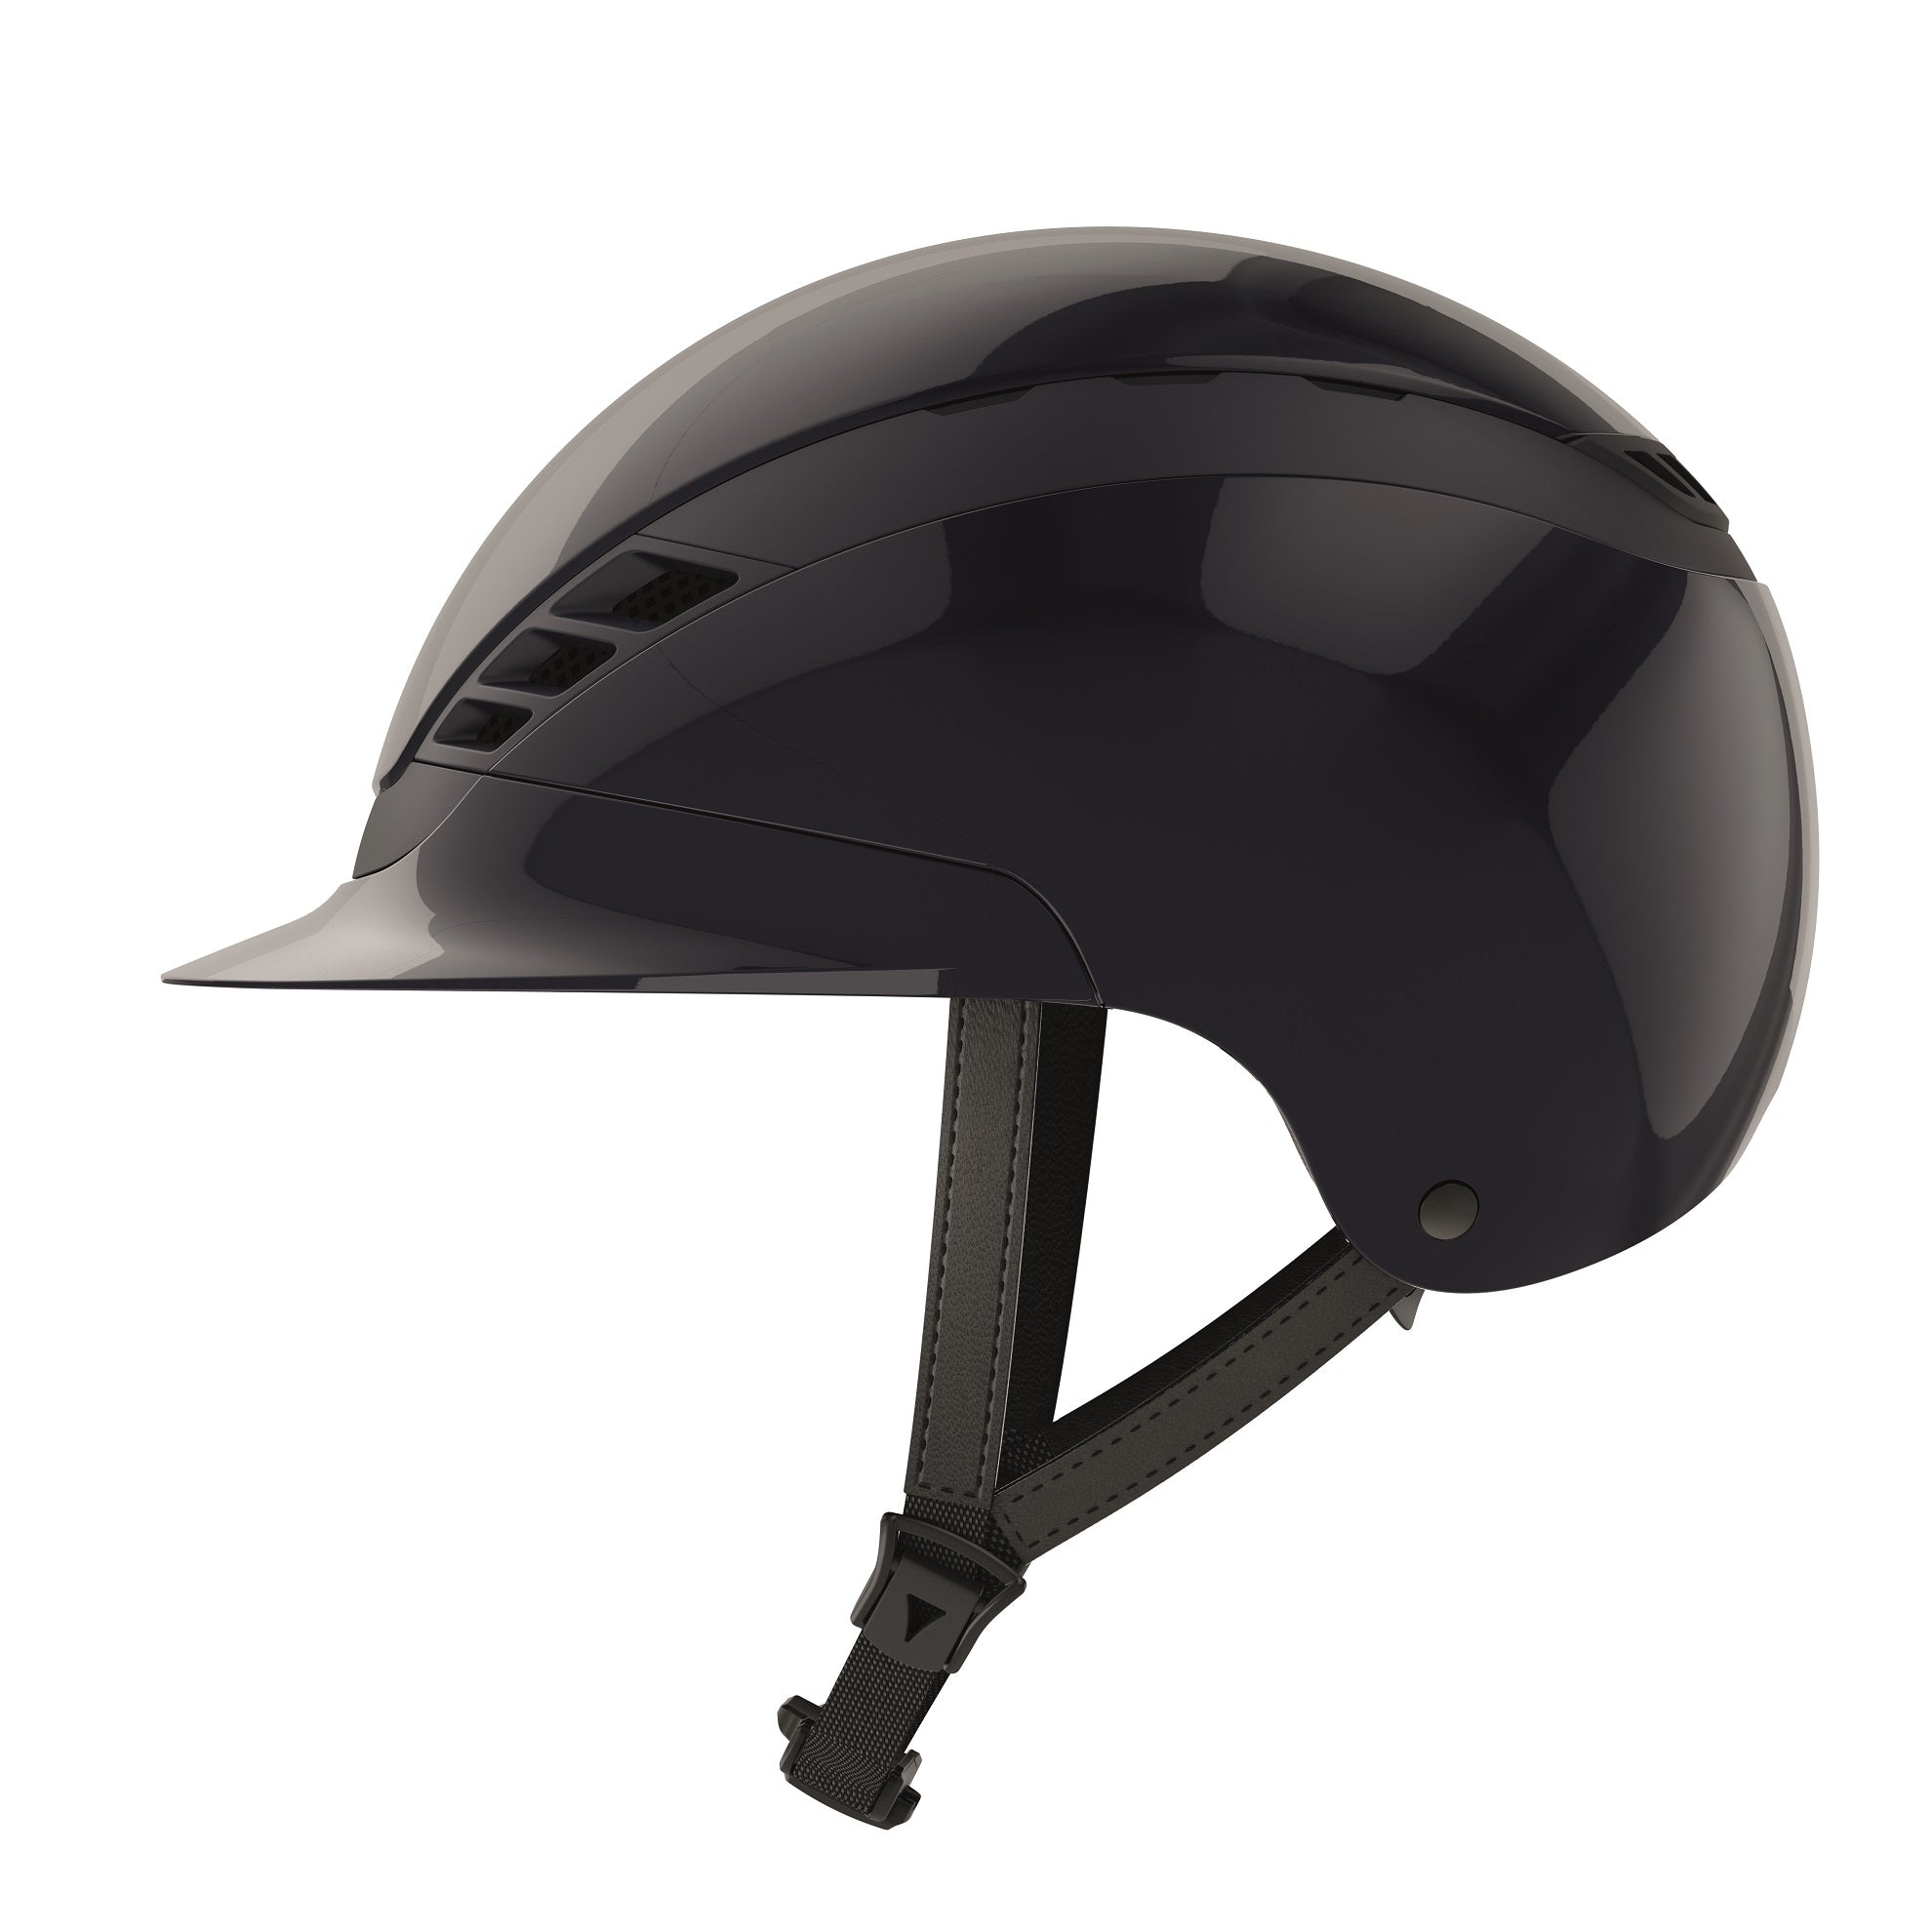 Abus AirLuxe Pure Riding Helmet - due October